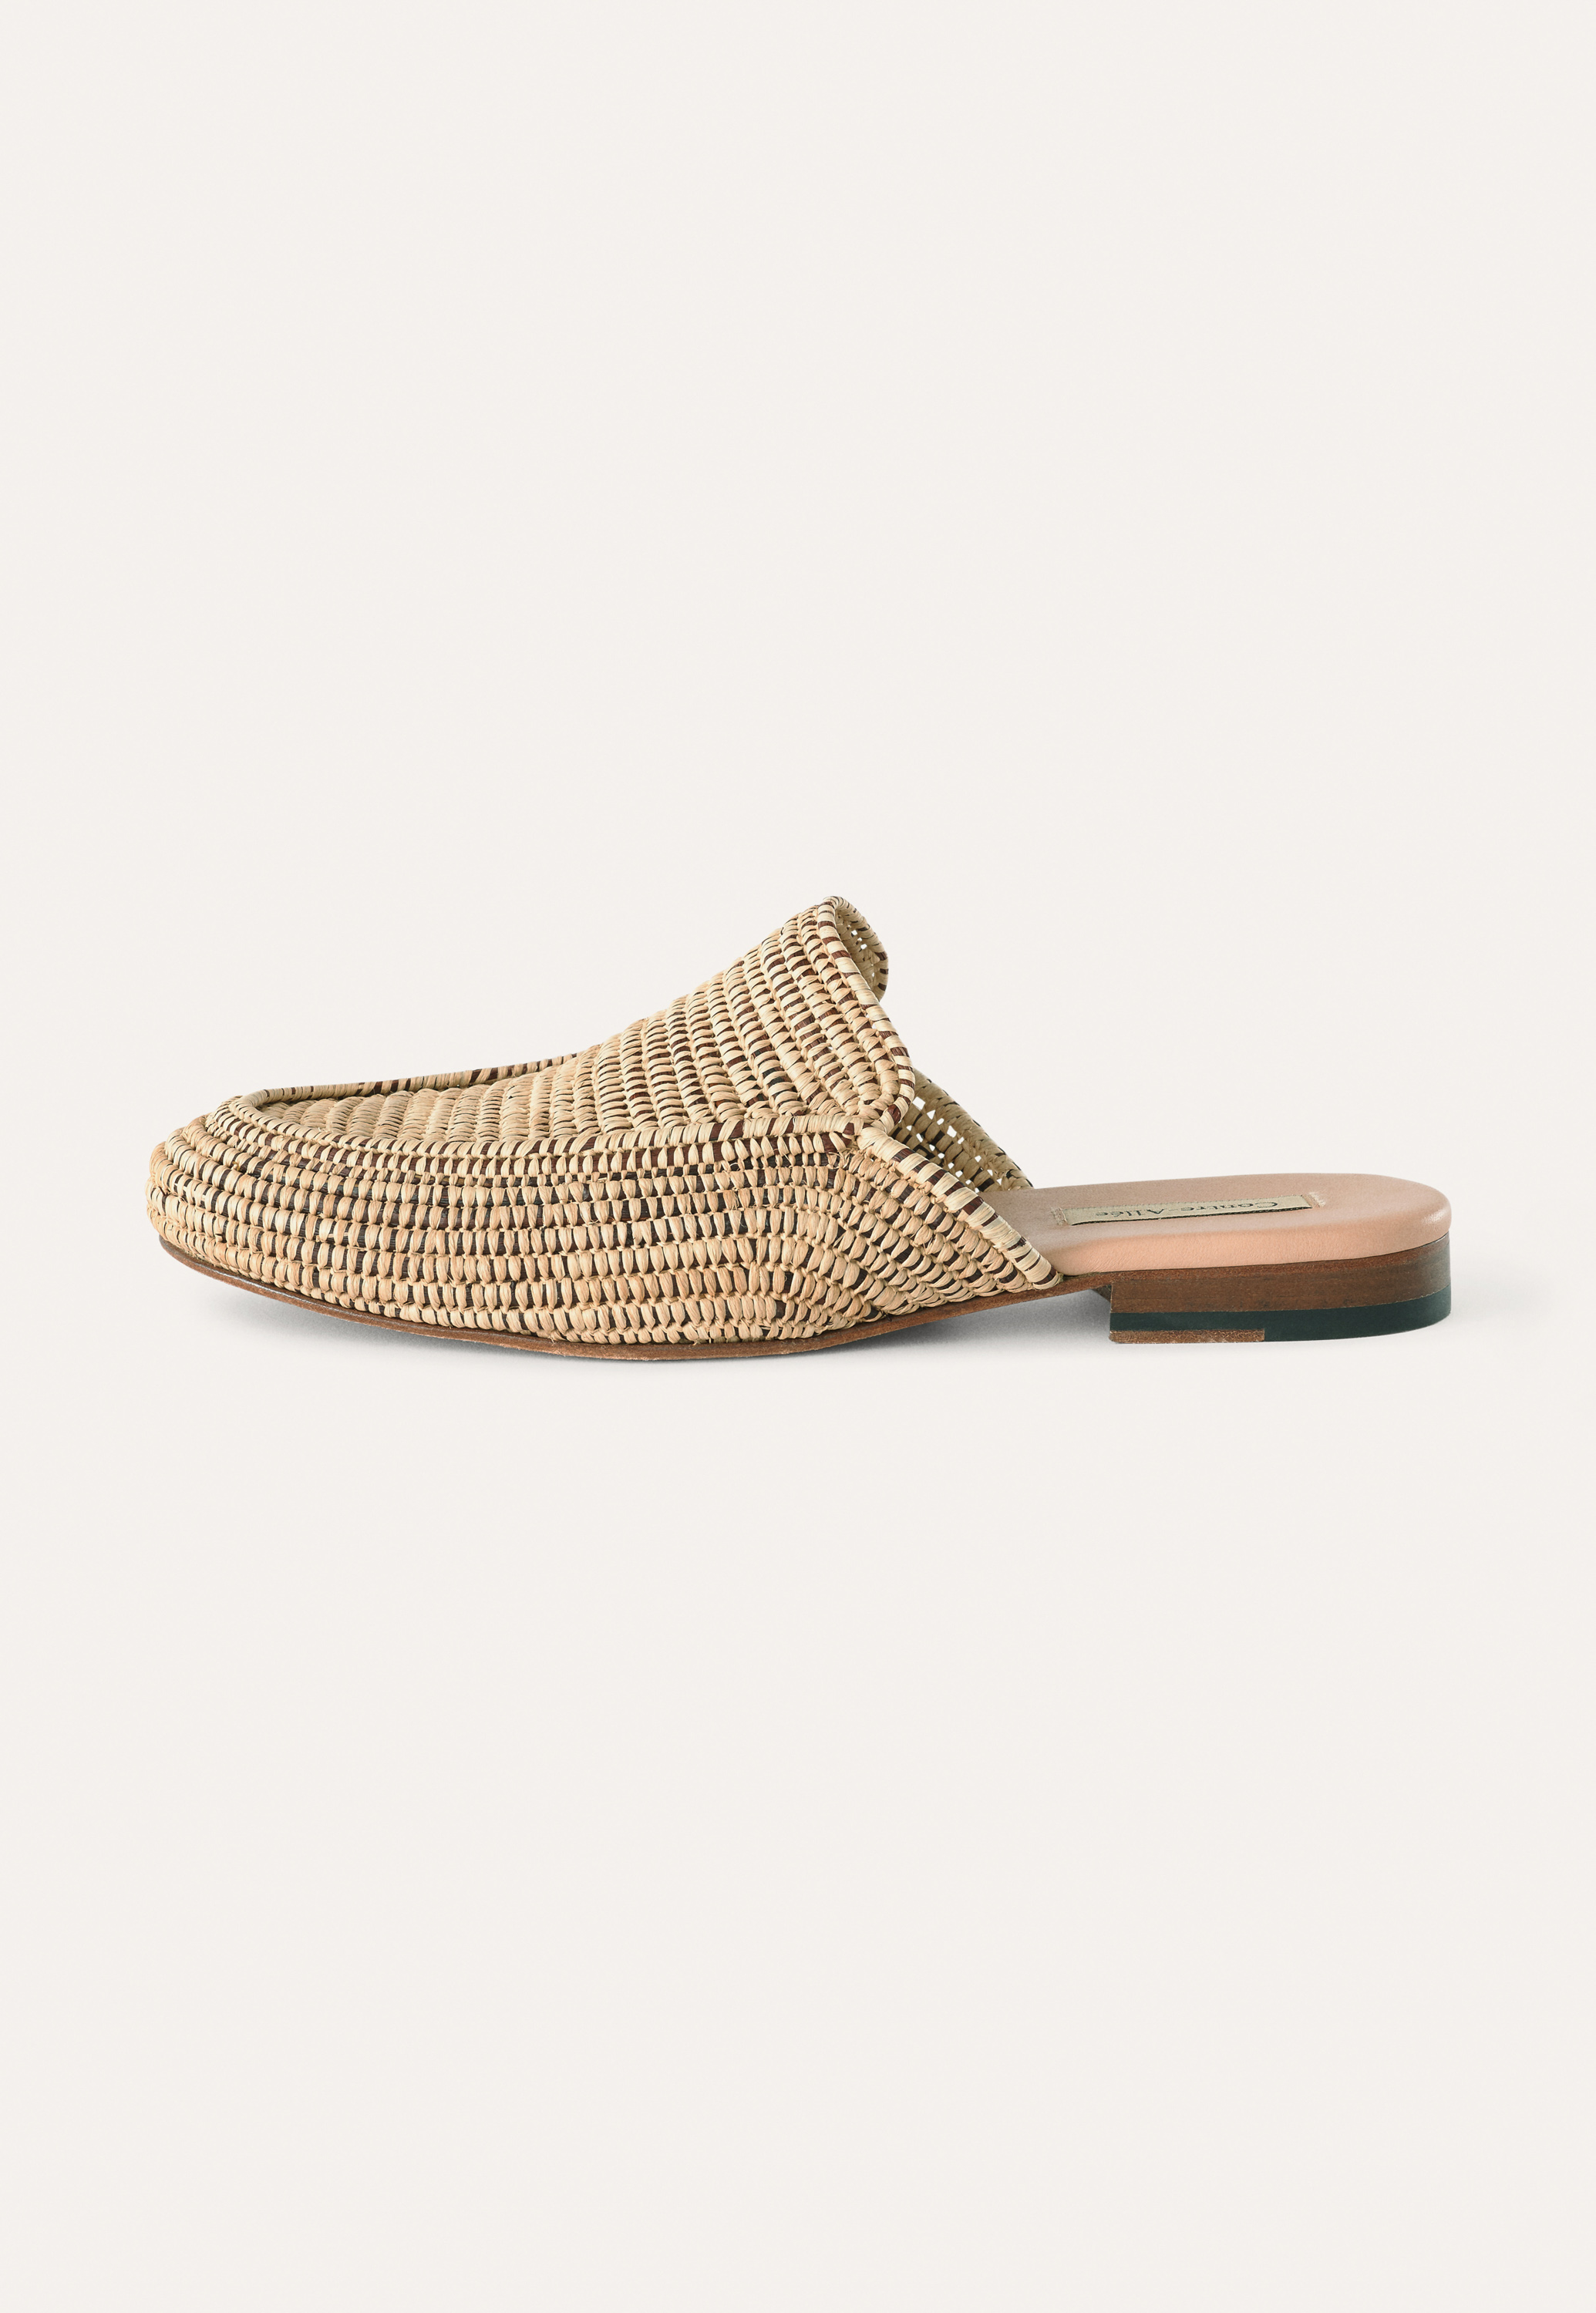 Mule Plate unique woven entirely by hand In raffia with a leather sole Summer sandals in Raffia Moroccan-style babouche